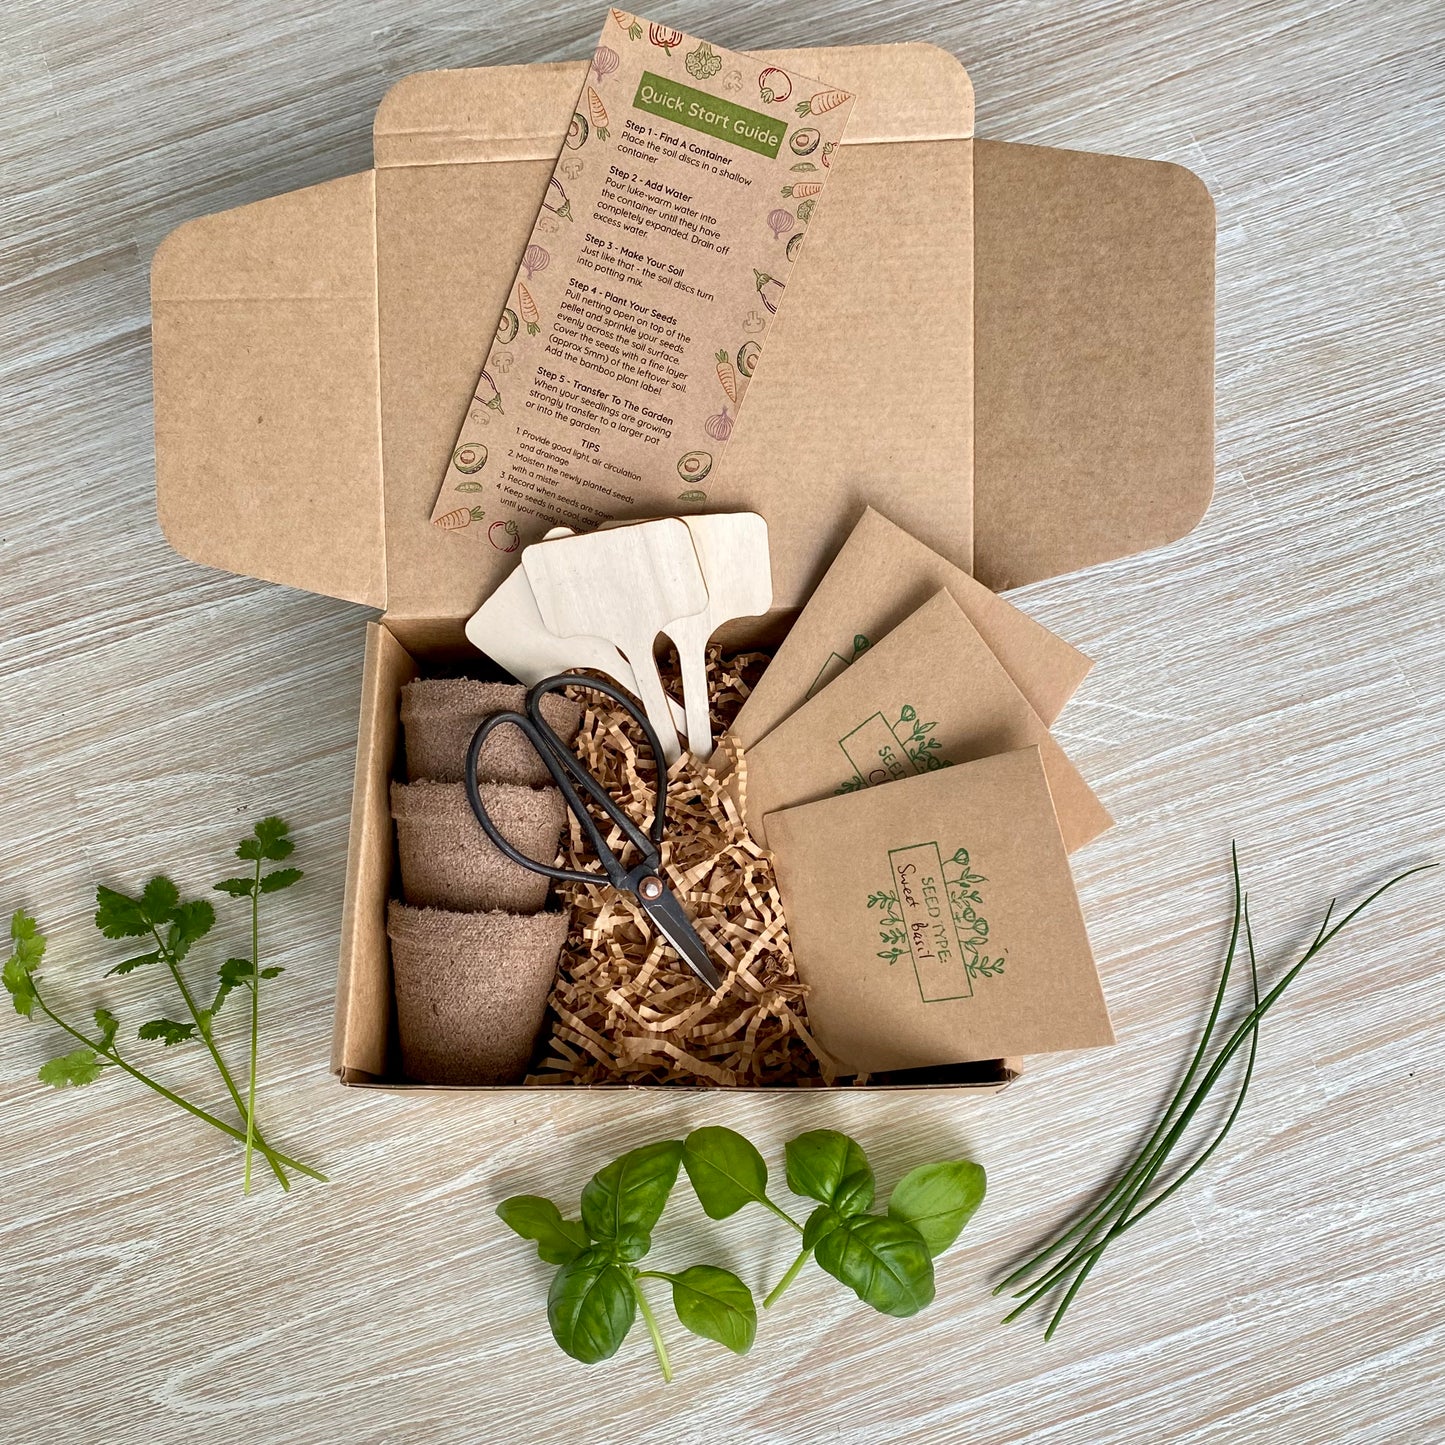 Eco Fox grow your own seed kits make the perfect gift. They include all you need to start your own mini garden. They are made up of a range of biodegradable and recyclable products.